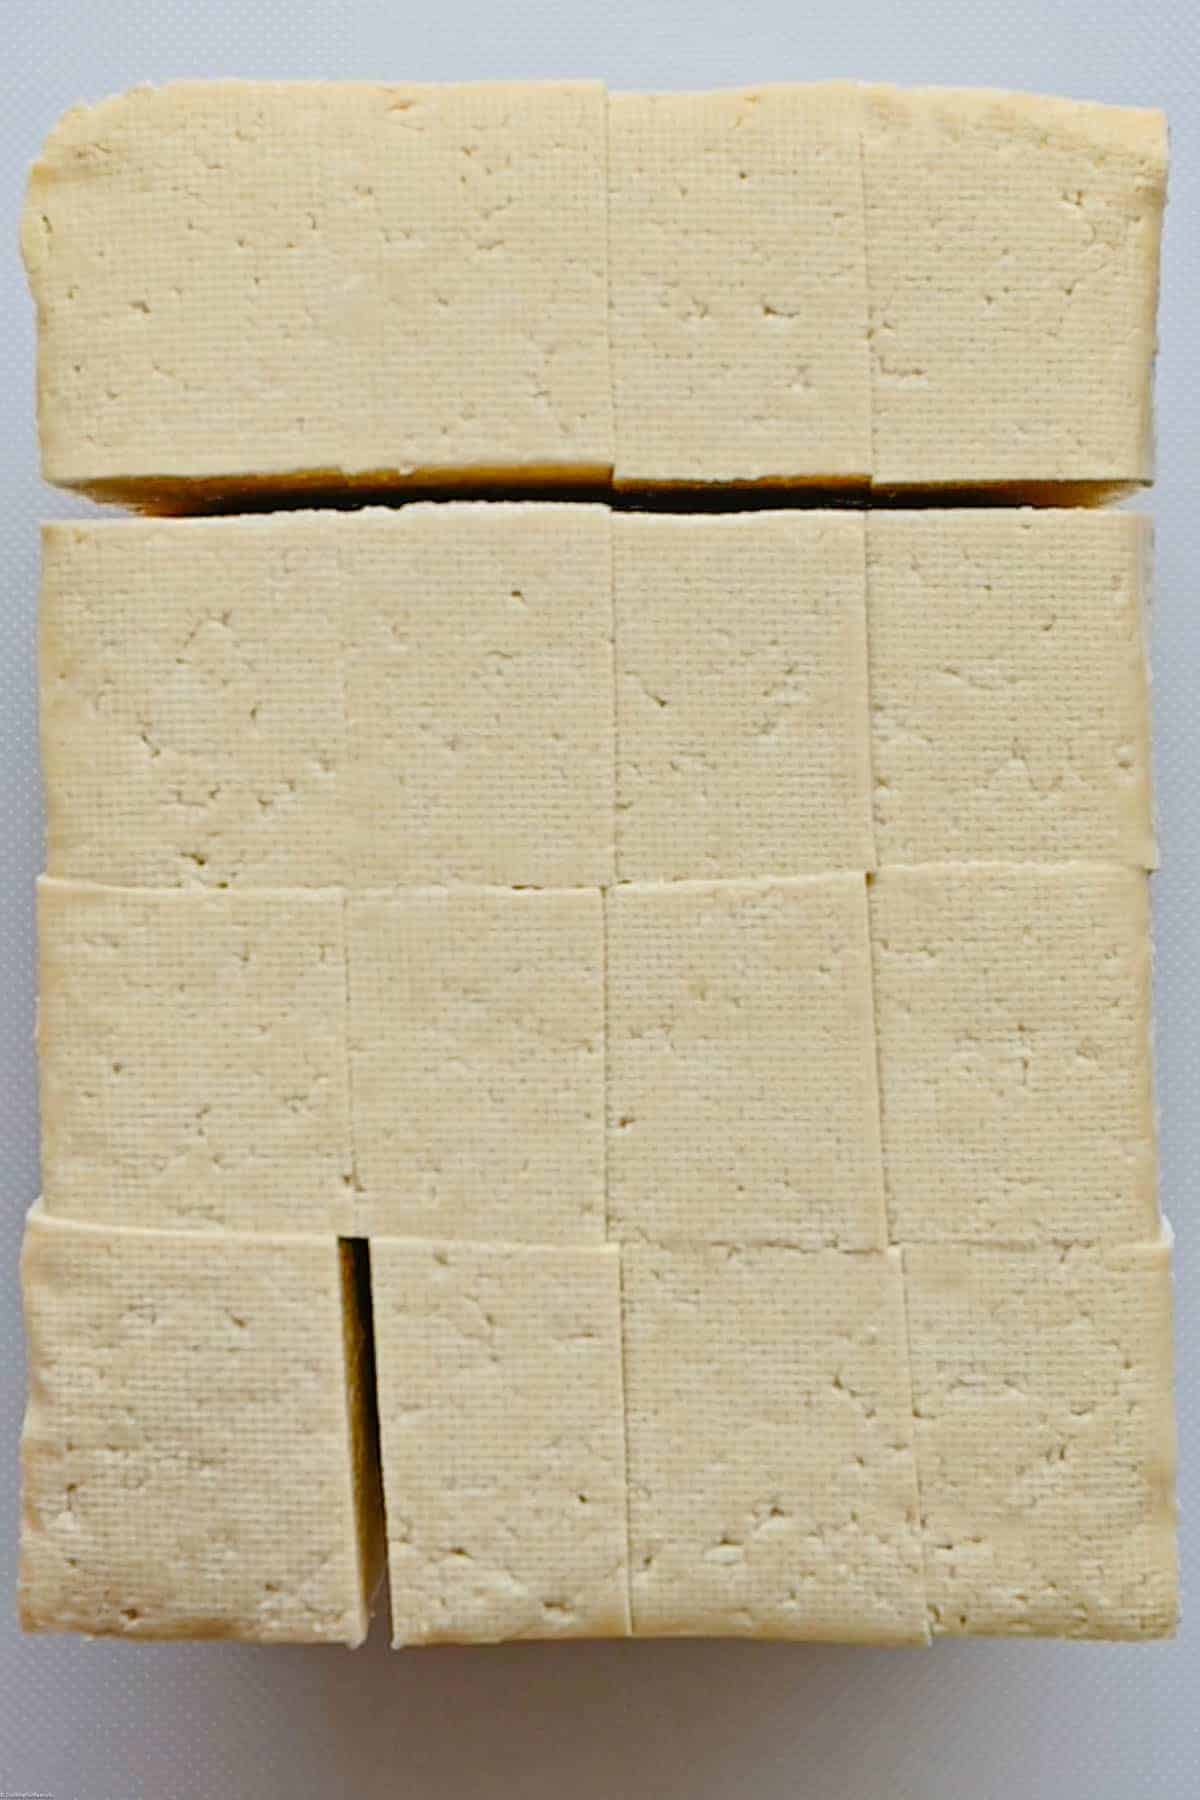 Extra firm tofu cut into cubes.